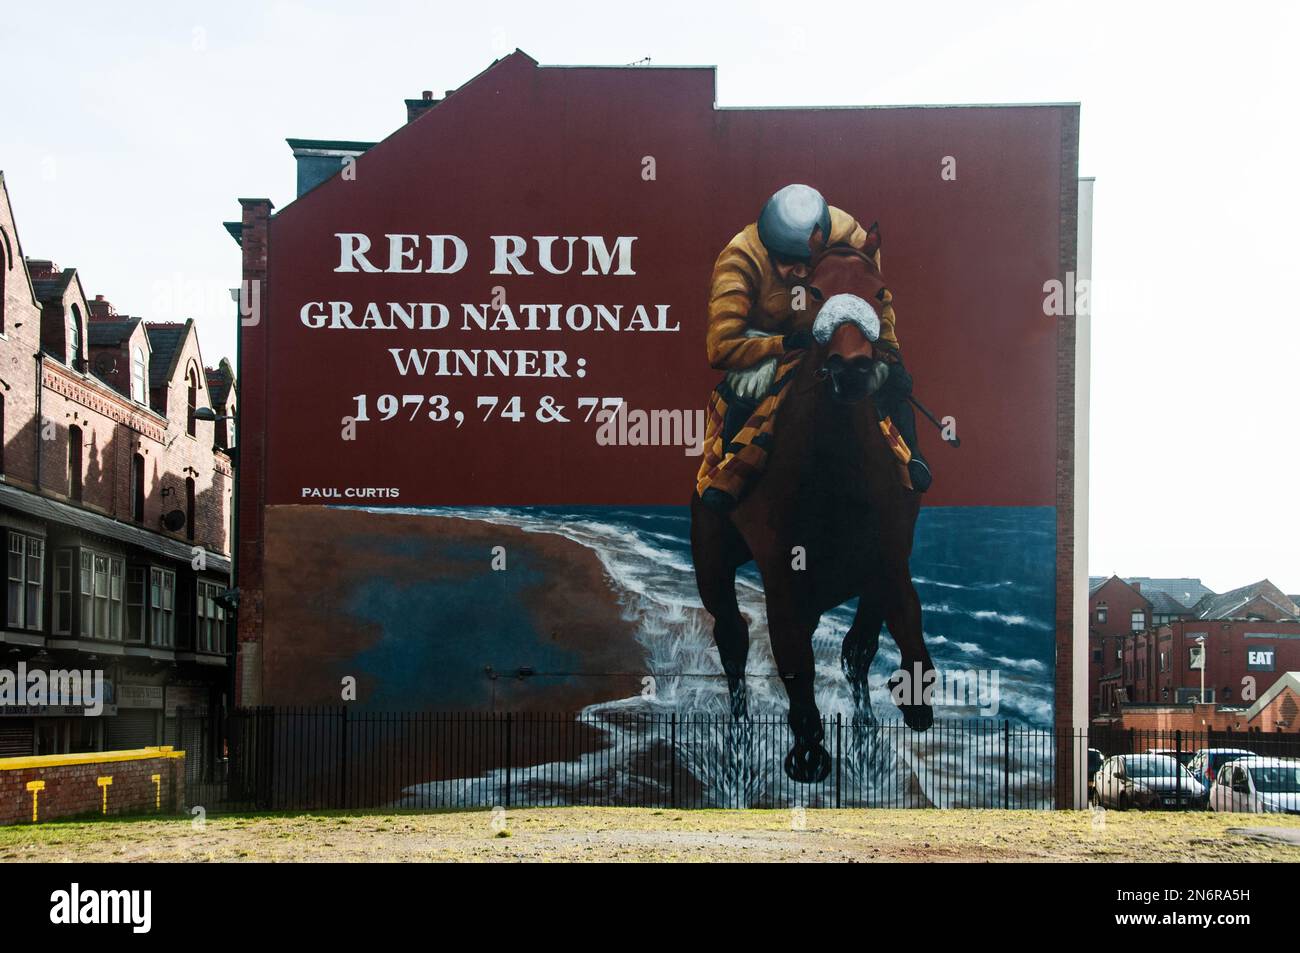 Around the UK - SouthportwWall art showing Red Rum, winner of three Grand National horse races Stock Photo